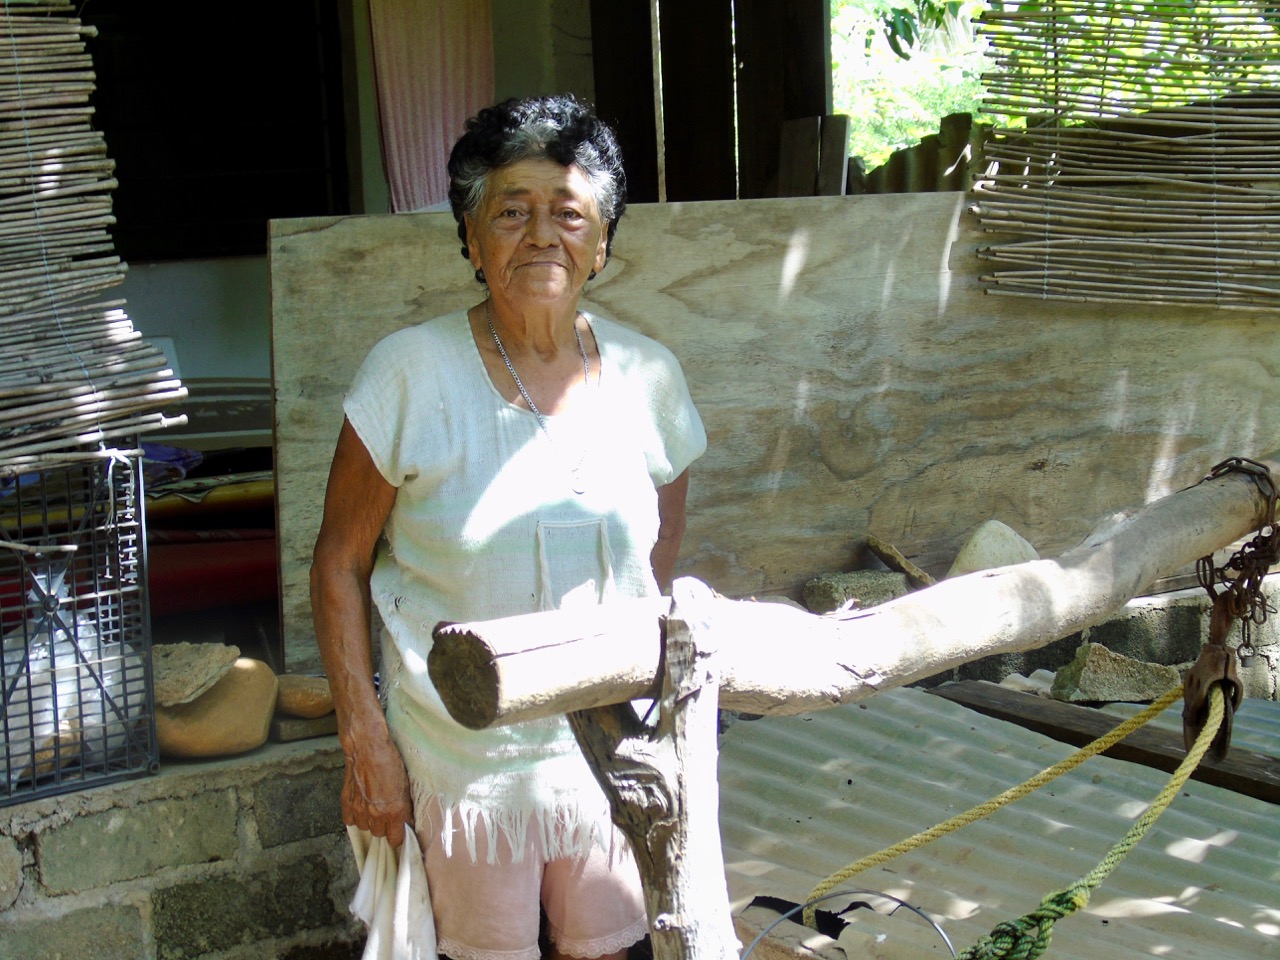 Doña Adelina at her well